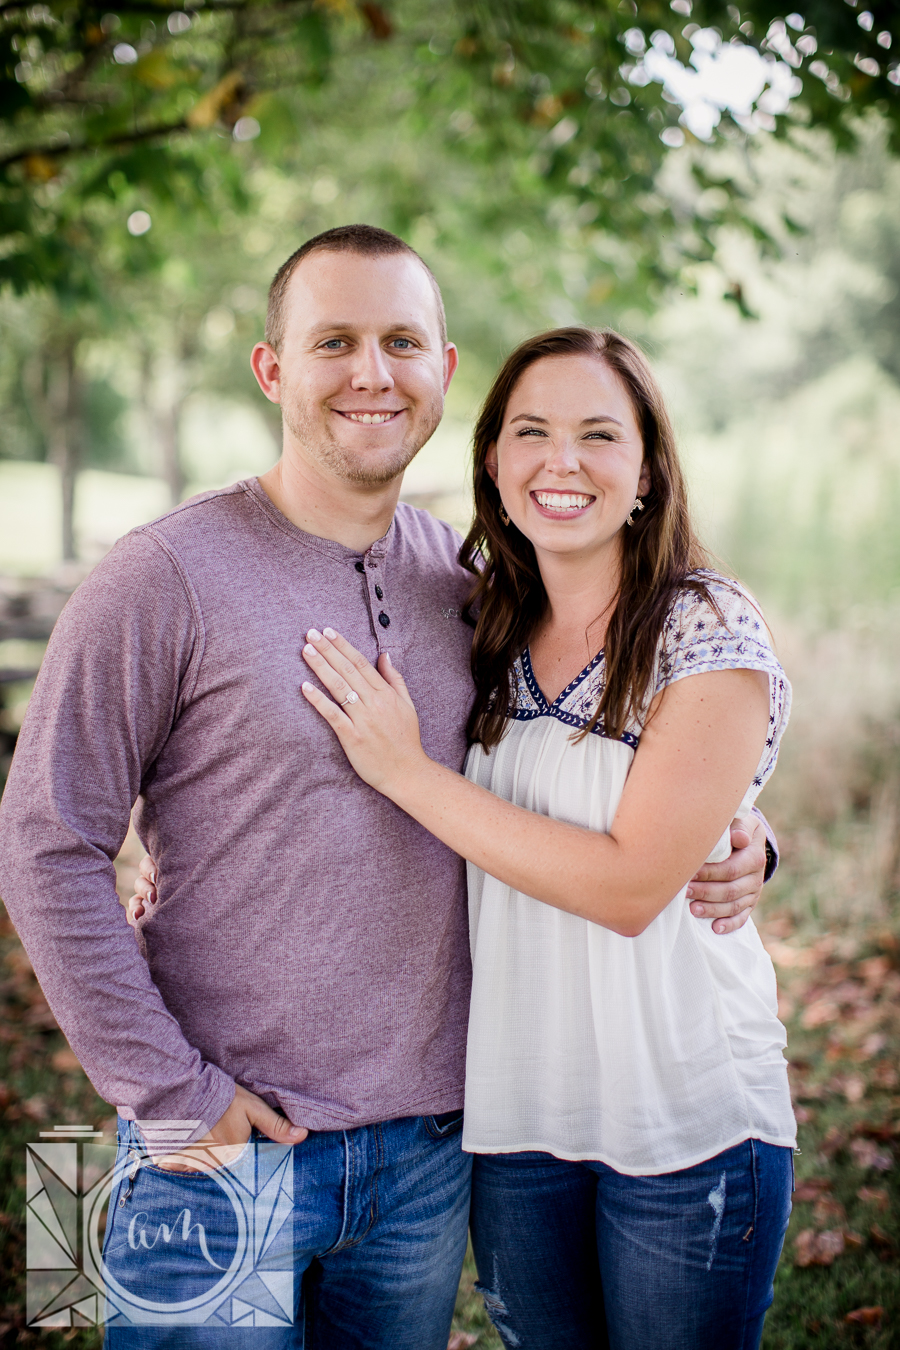 Her hand on his chest looking at camera engagement photo by Knoxville Wedding Photographer, Amanda May Photos.